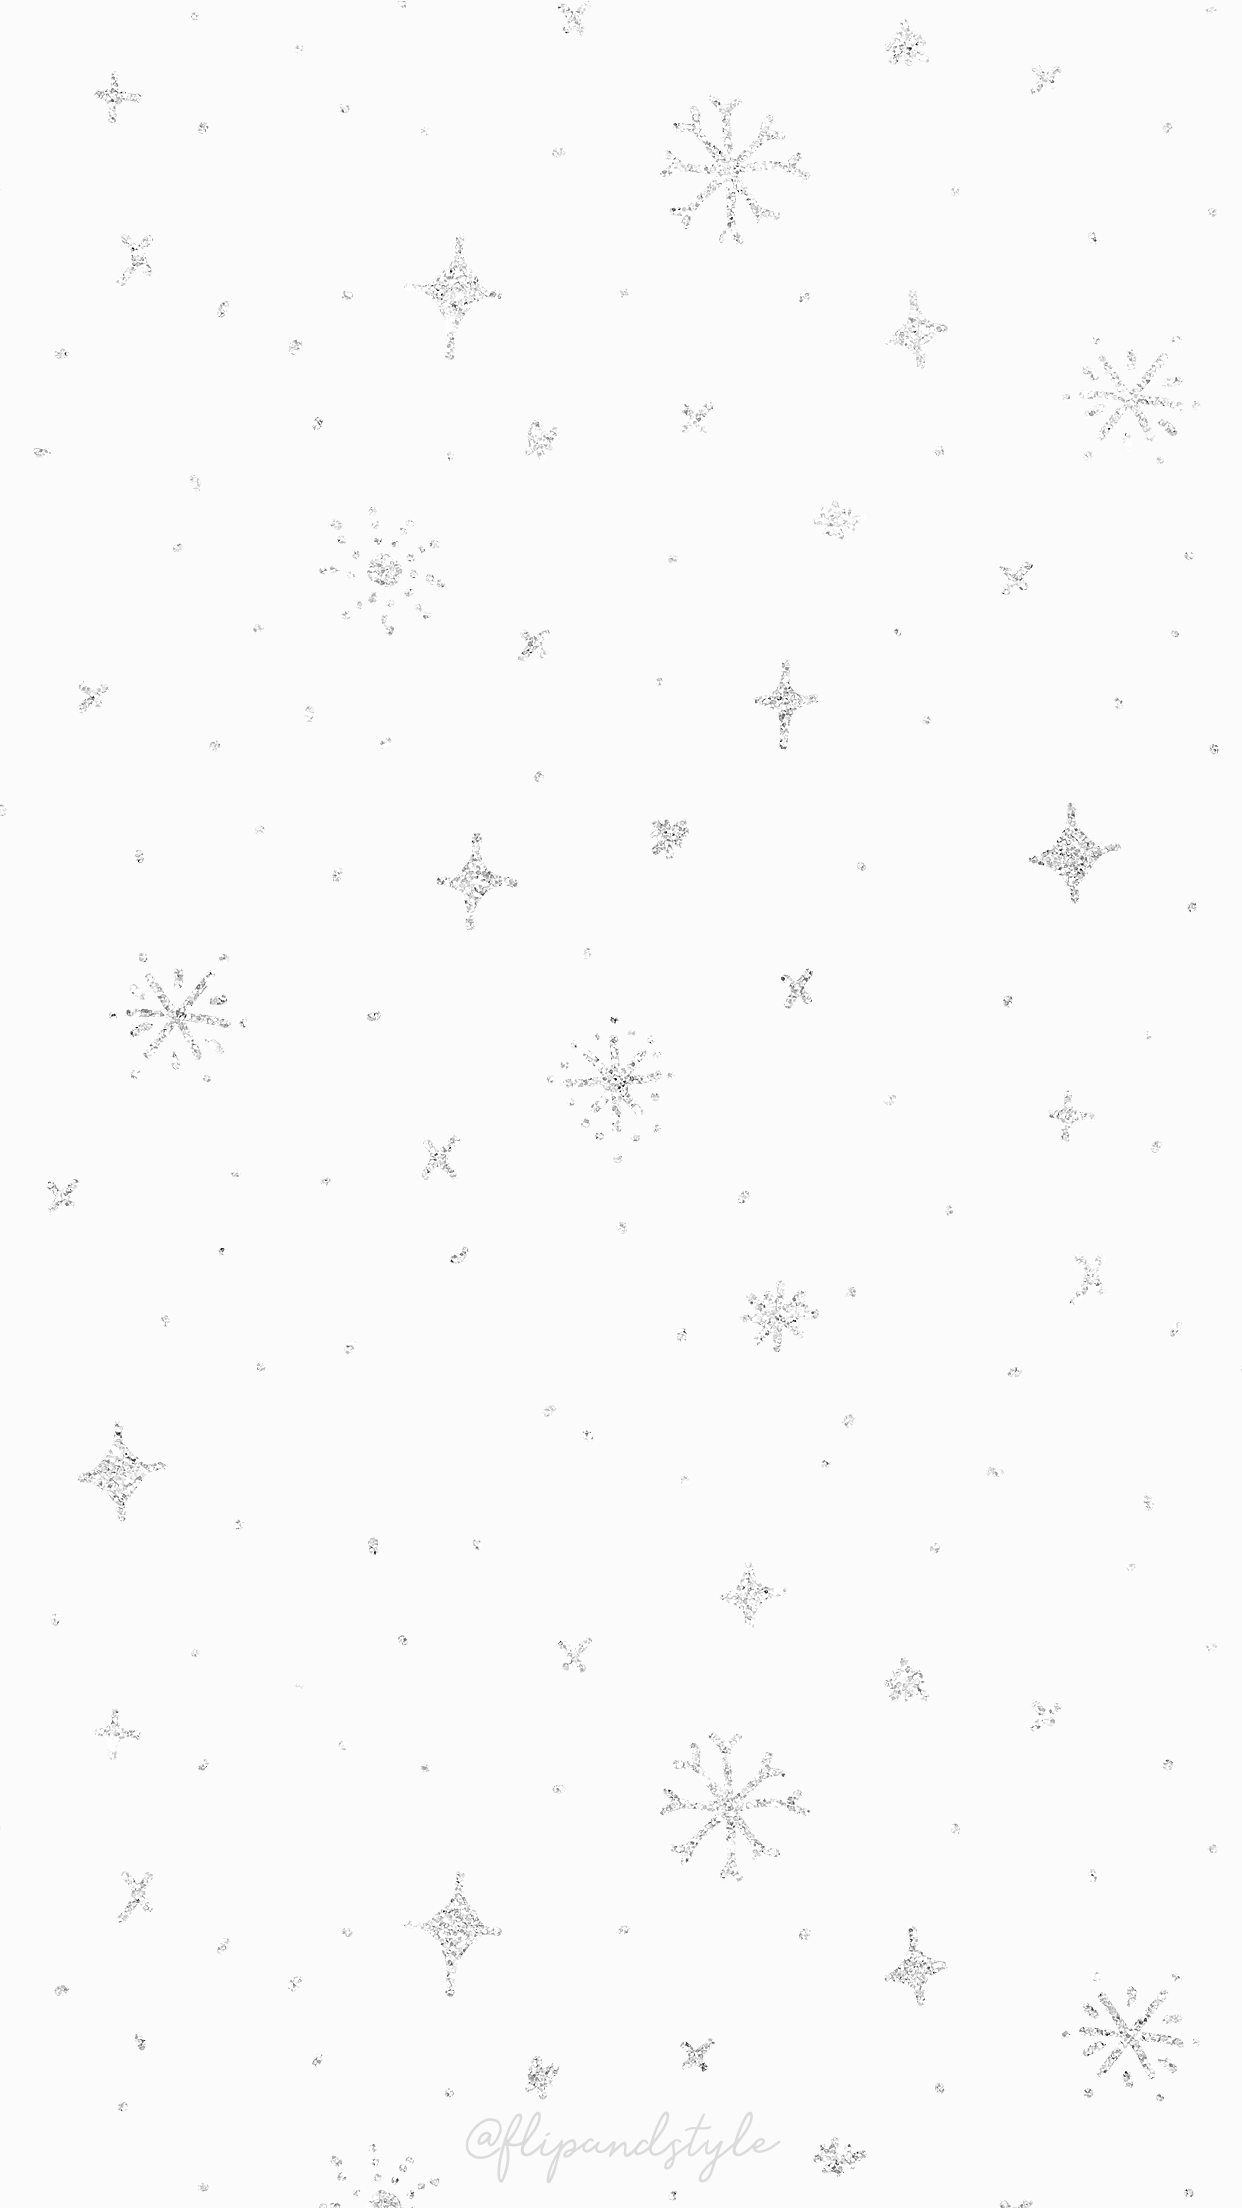 A white background with snowflakes and stars - White Christmas